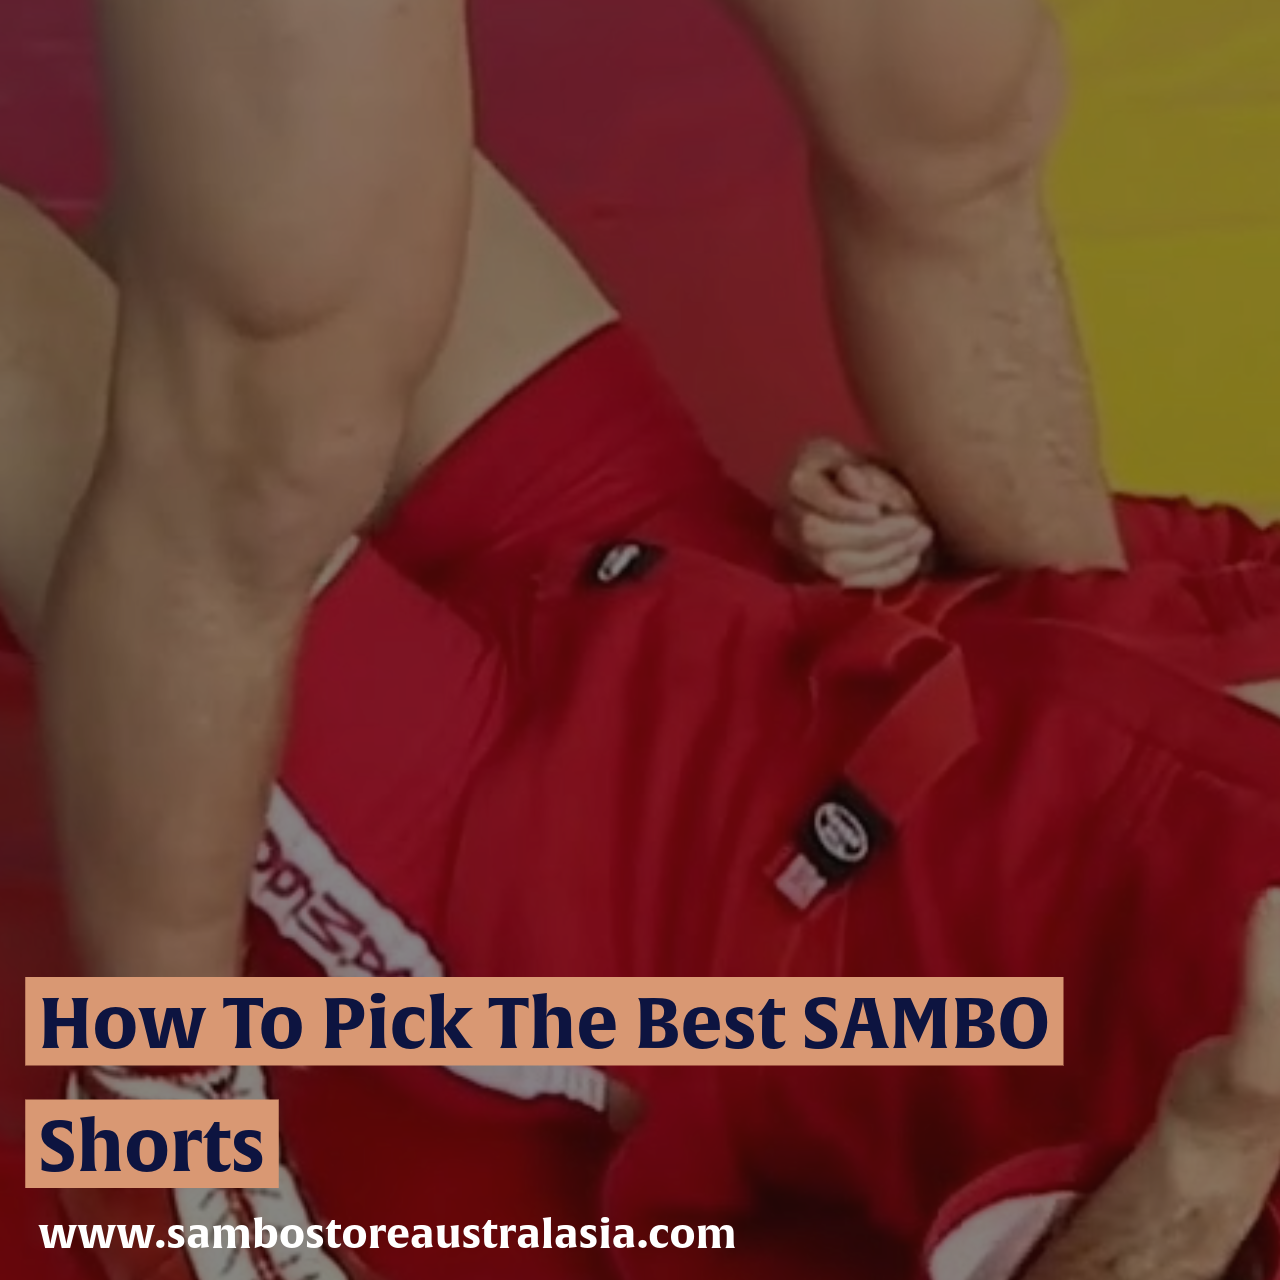 How To Pick The Best SAMBO Shorts